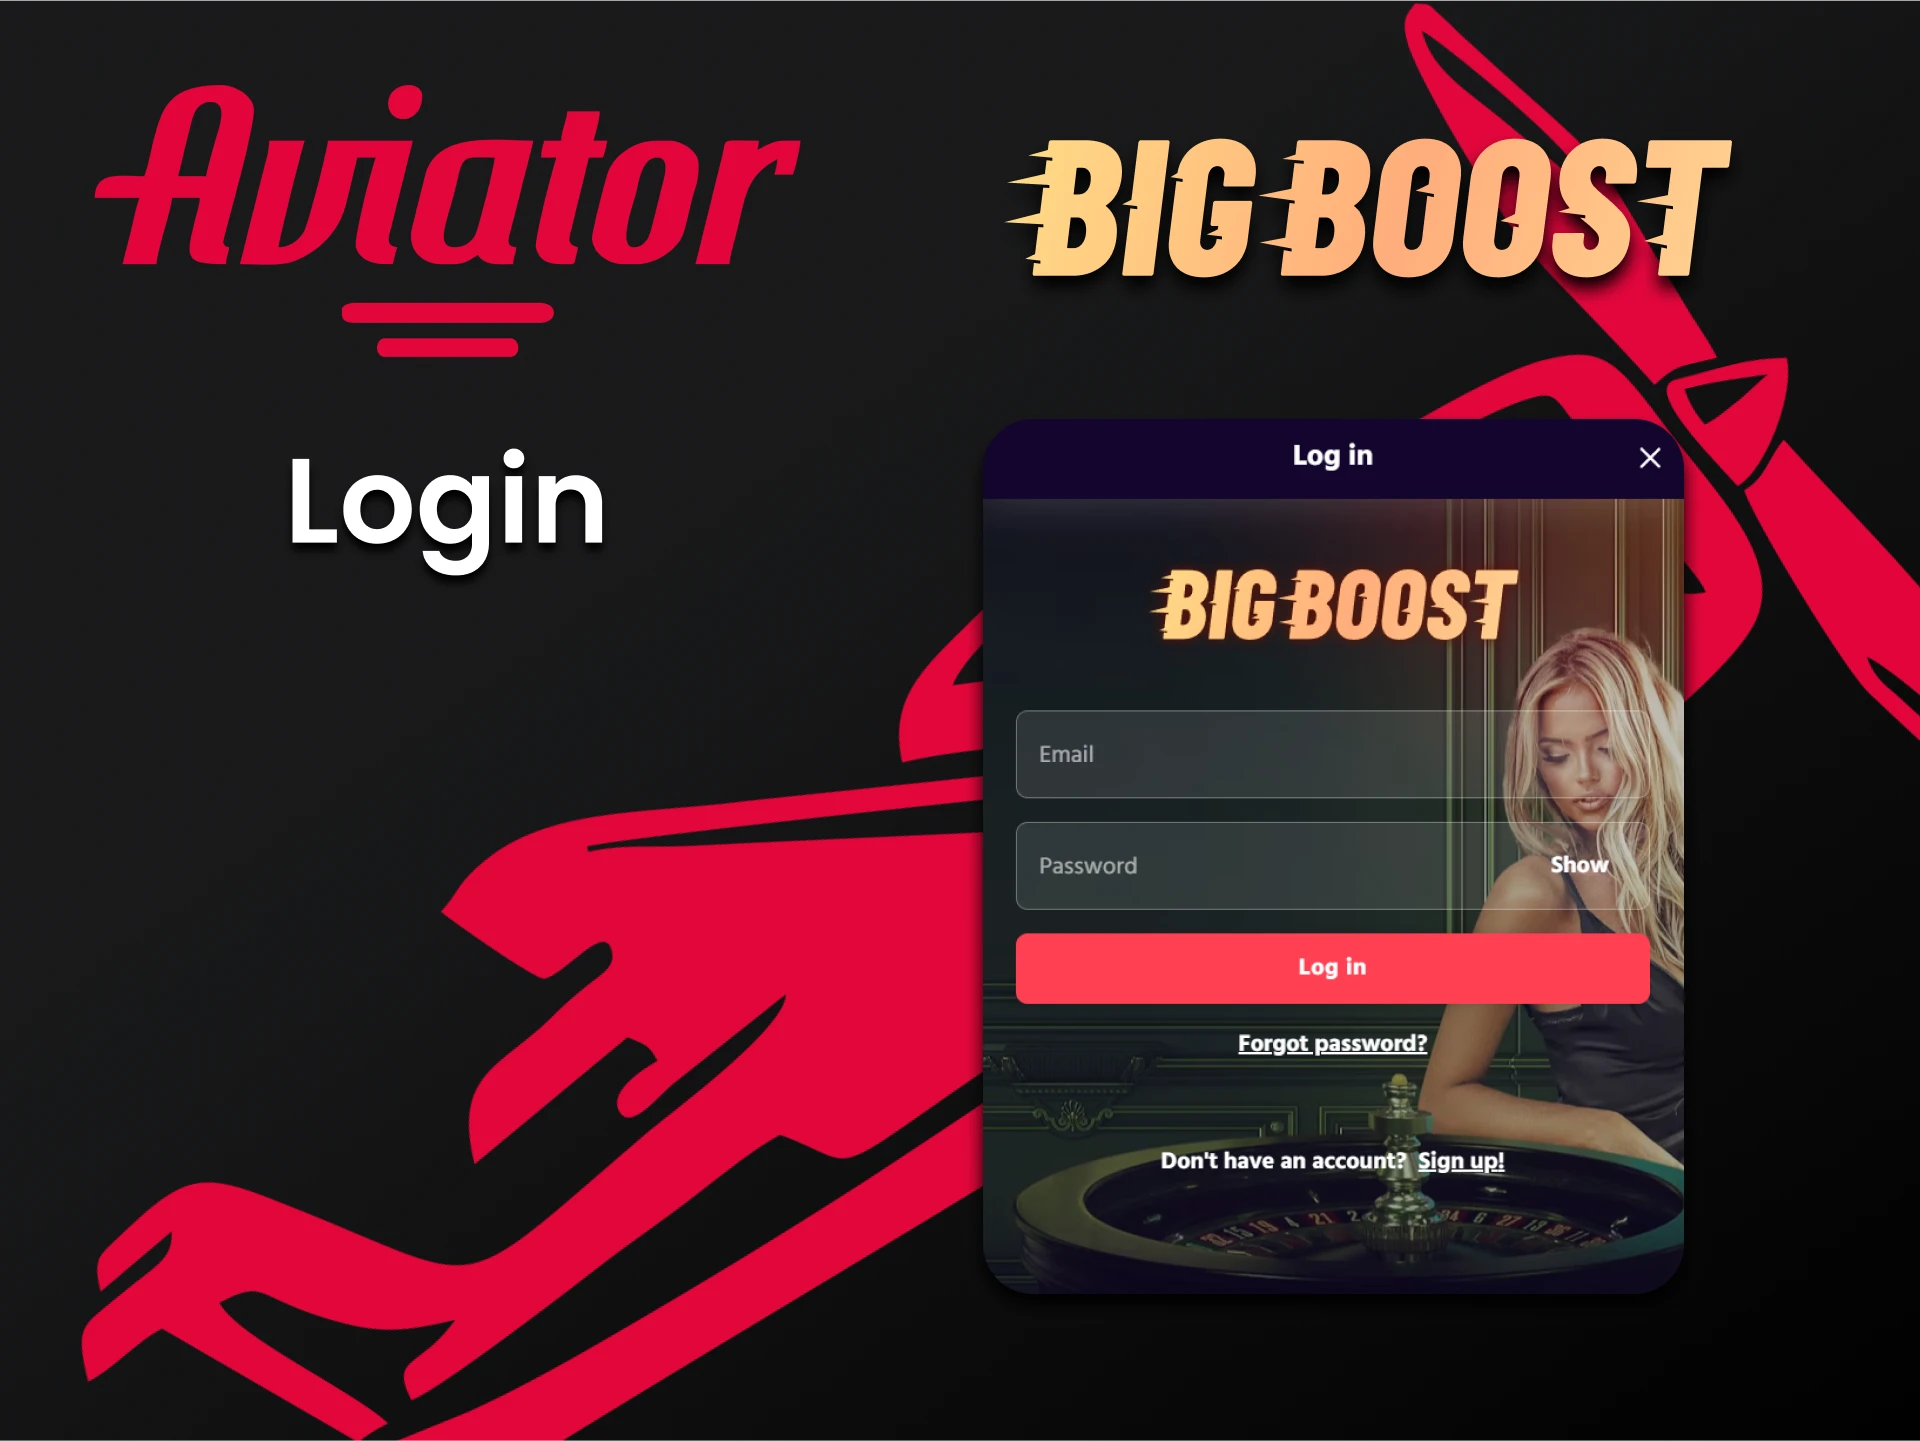 By logging into your personal account on Big Boost, you can play Aviator.